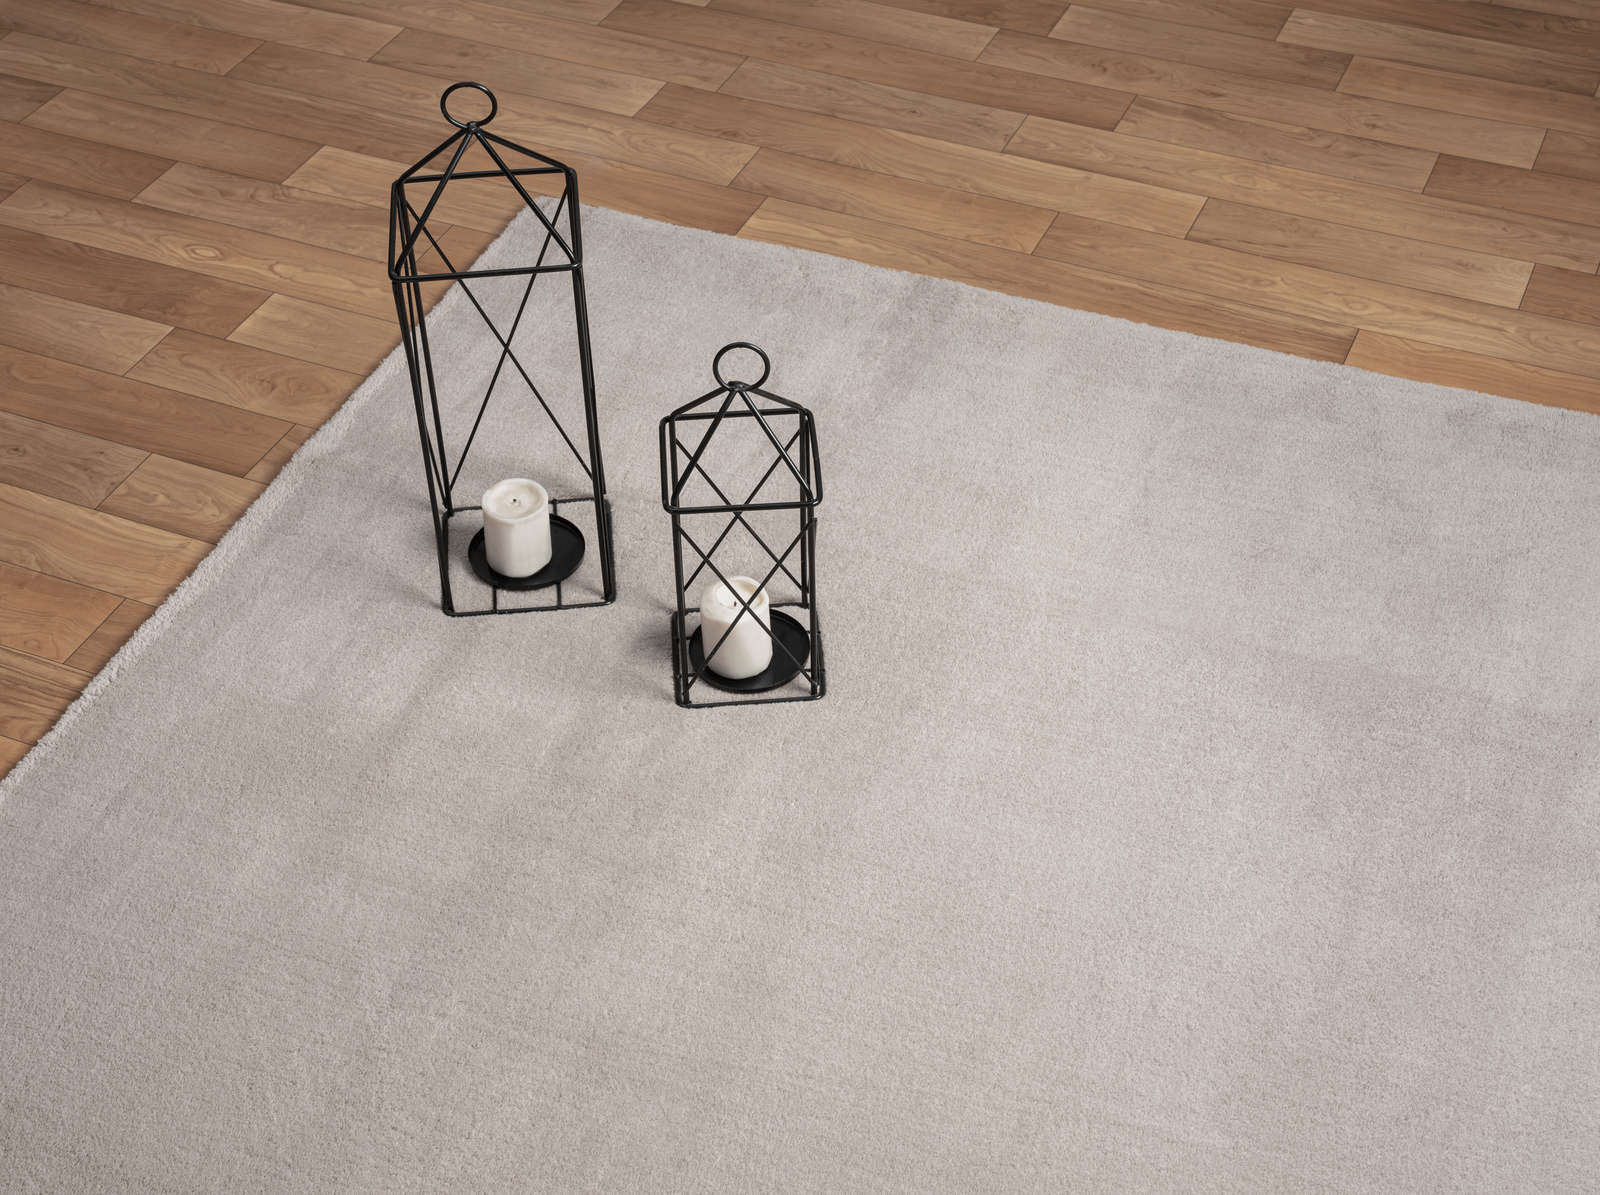             Fashionable Round High Pile Rug in Sand - Ø 120 cm
        